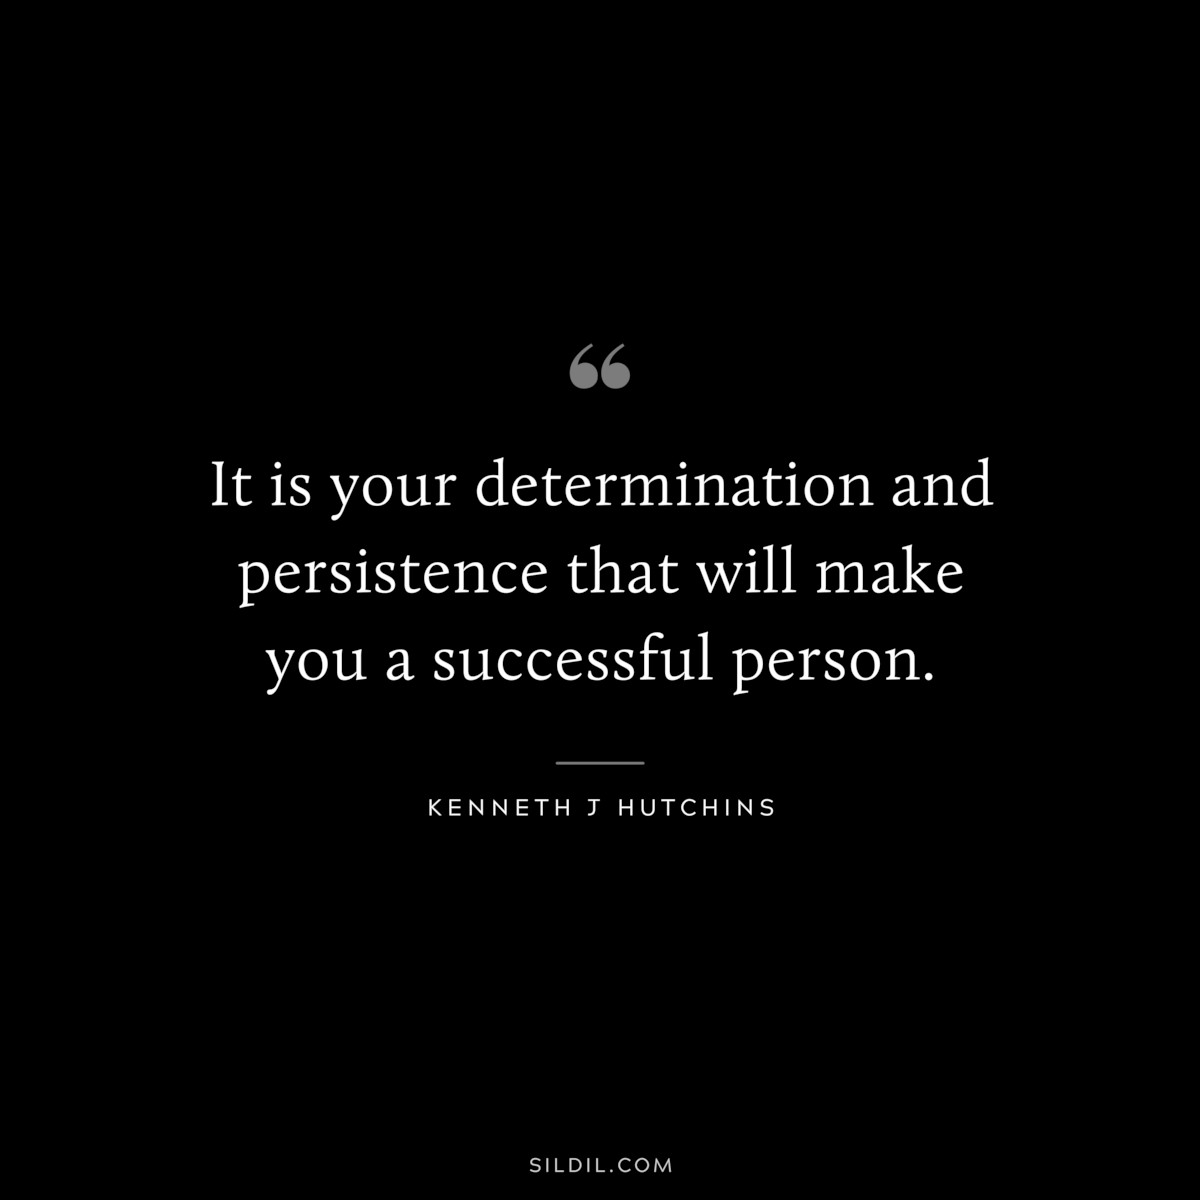 It is your determination and persistence that will make you a successful person. ― Kenneth J Hutchins